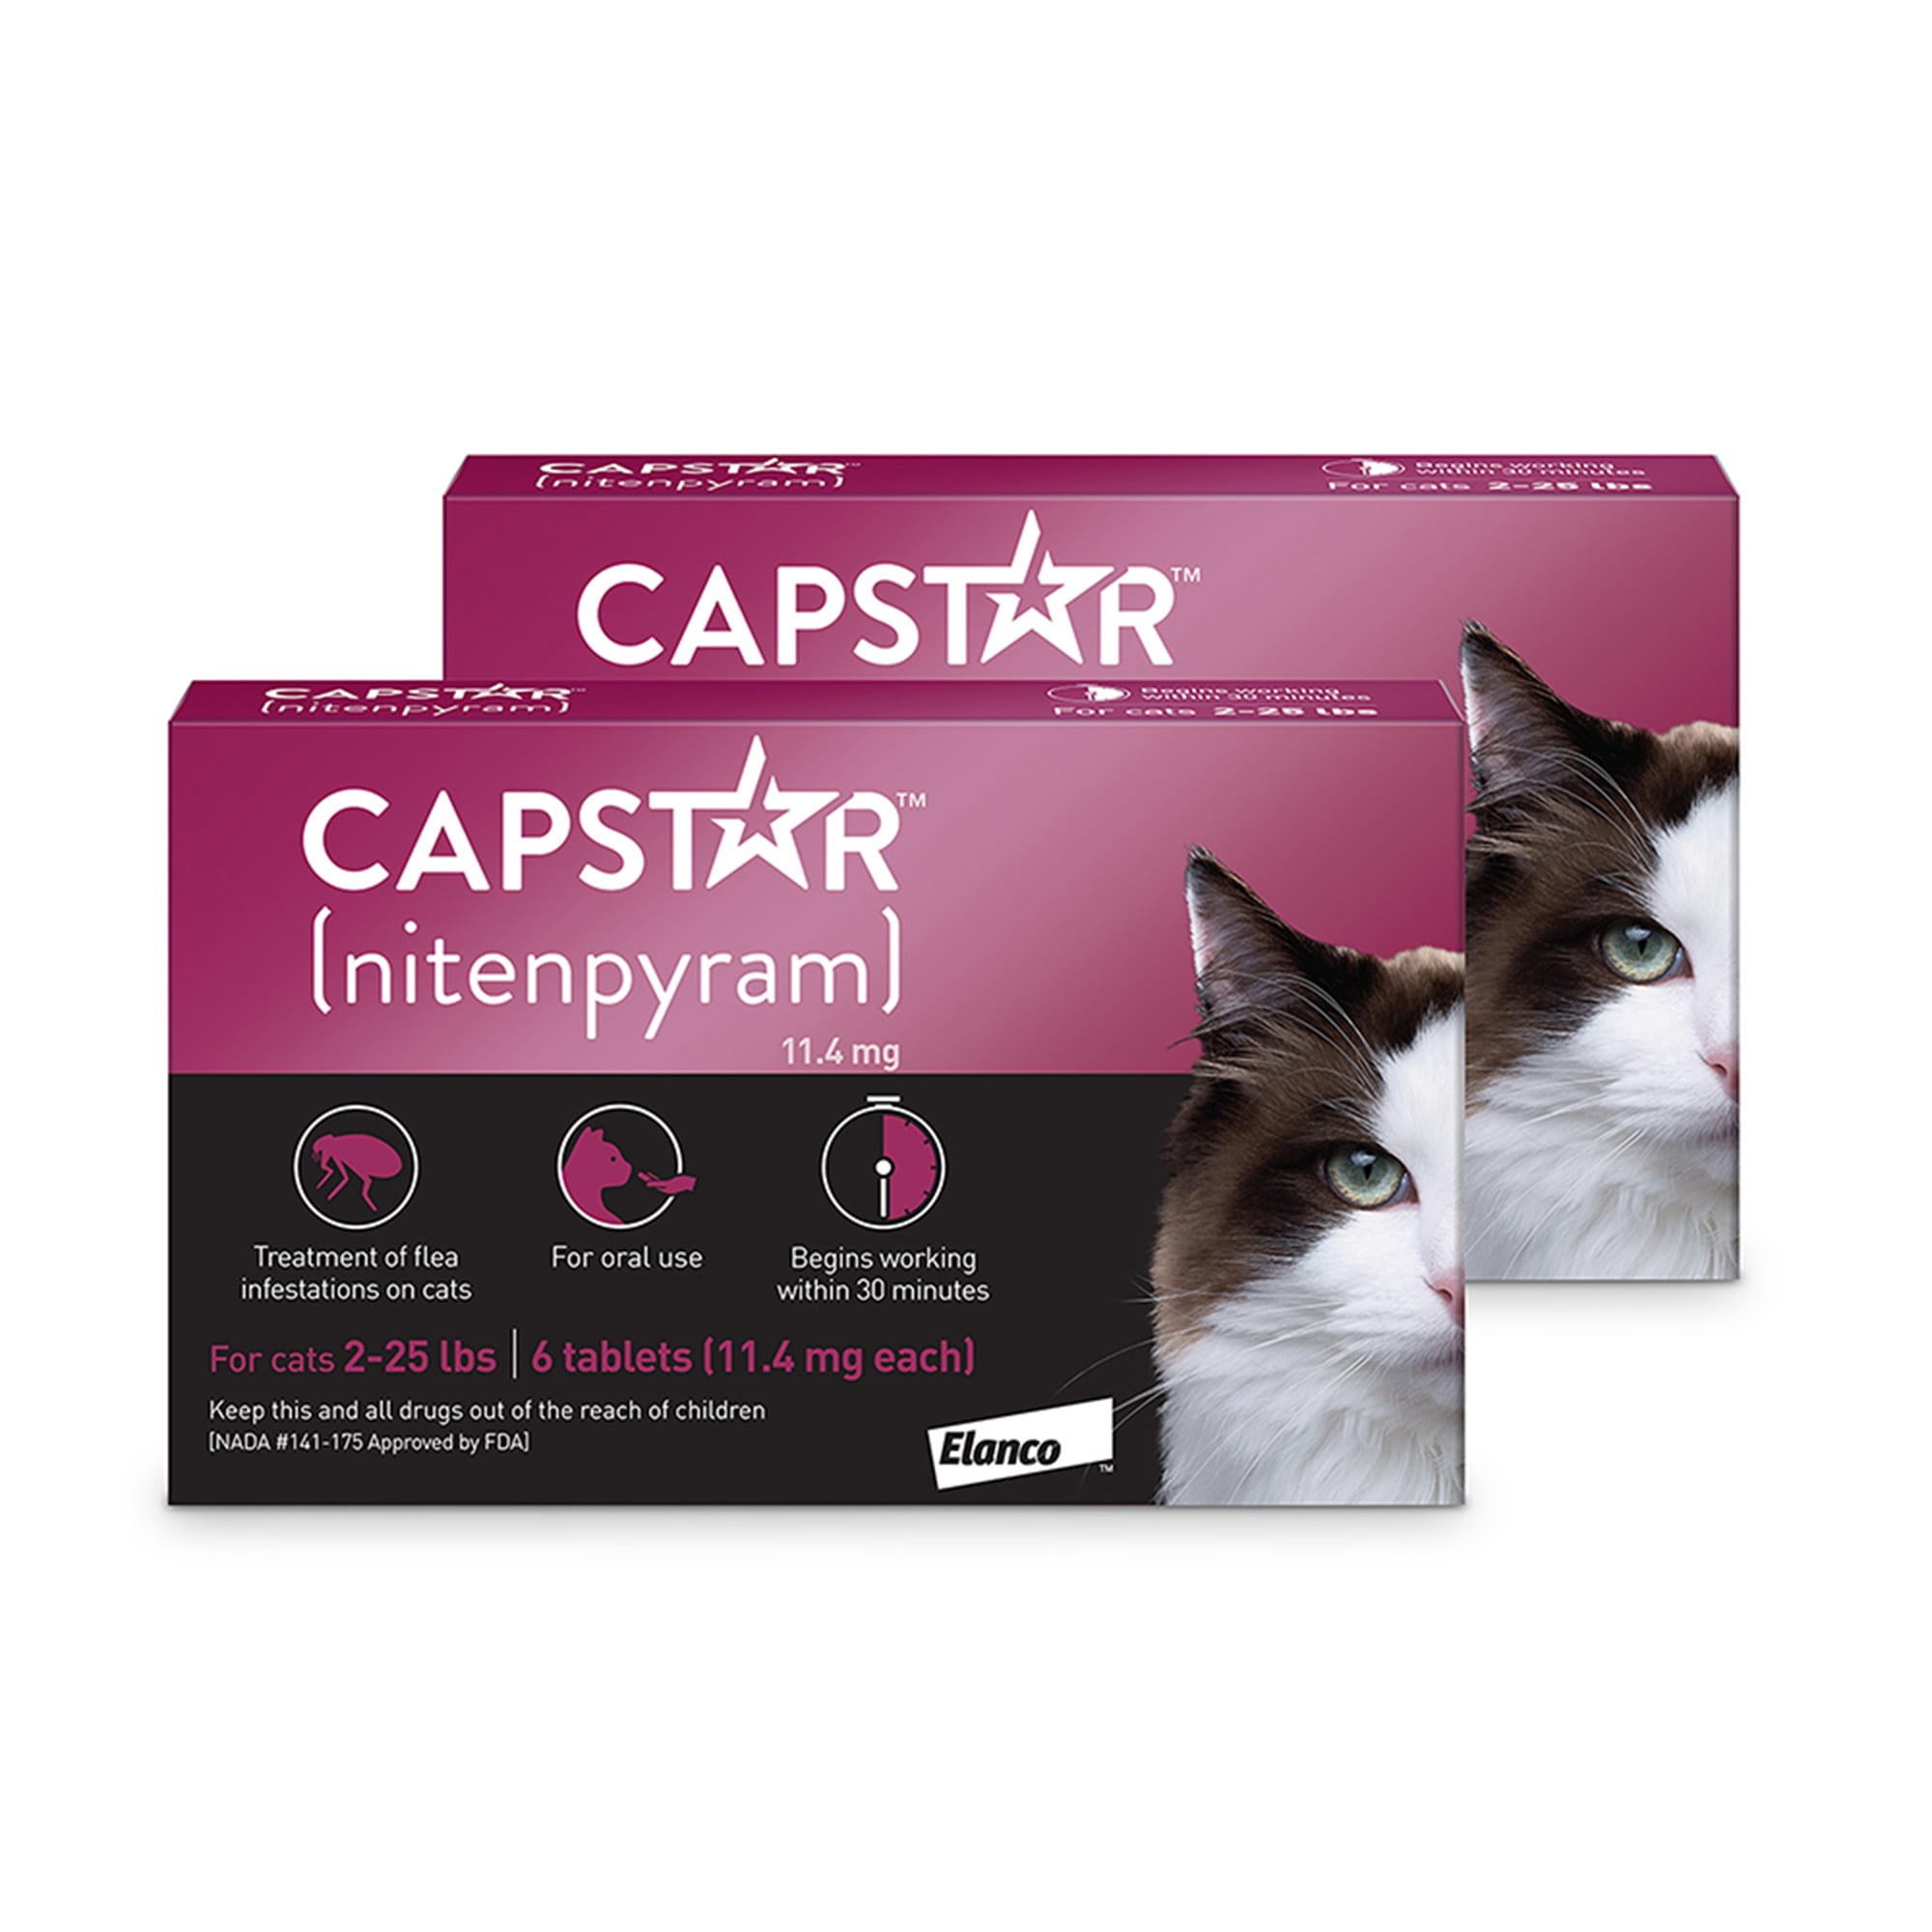 Capstar Flea Tablets for Cats 225 lbs., Count of 12 Petco